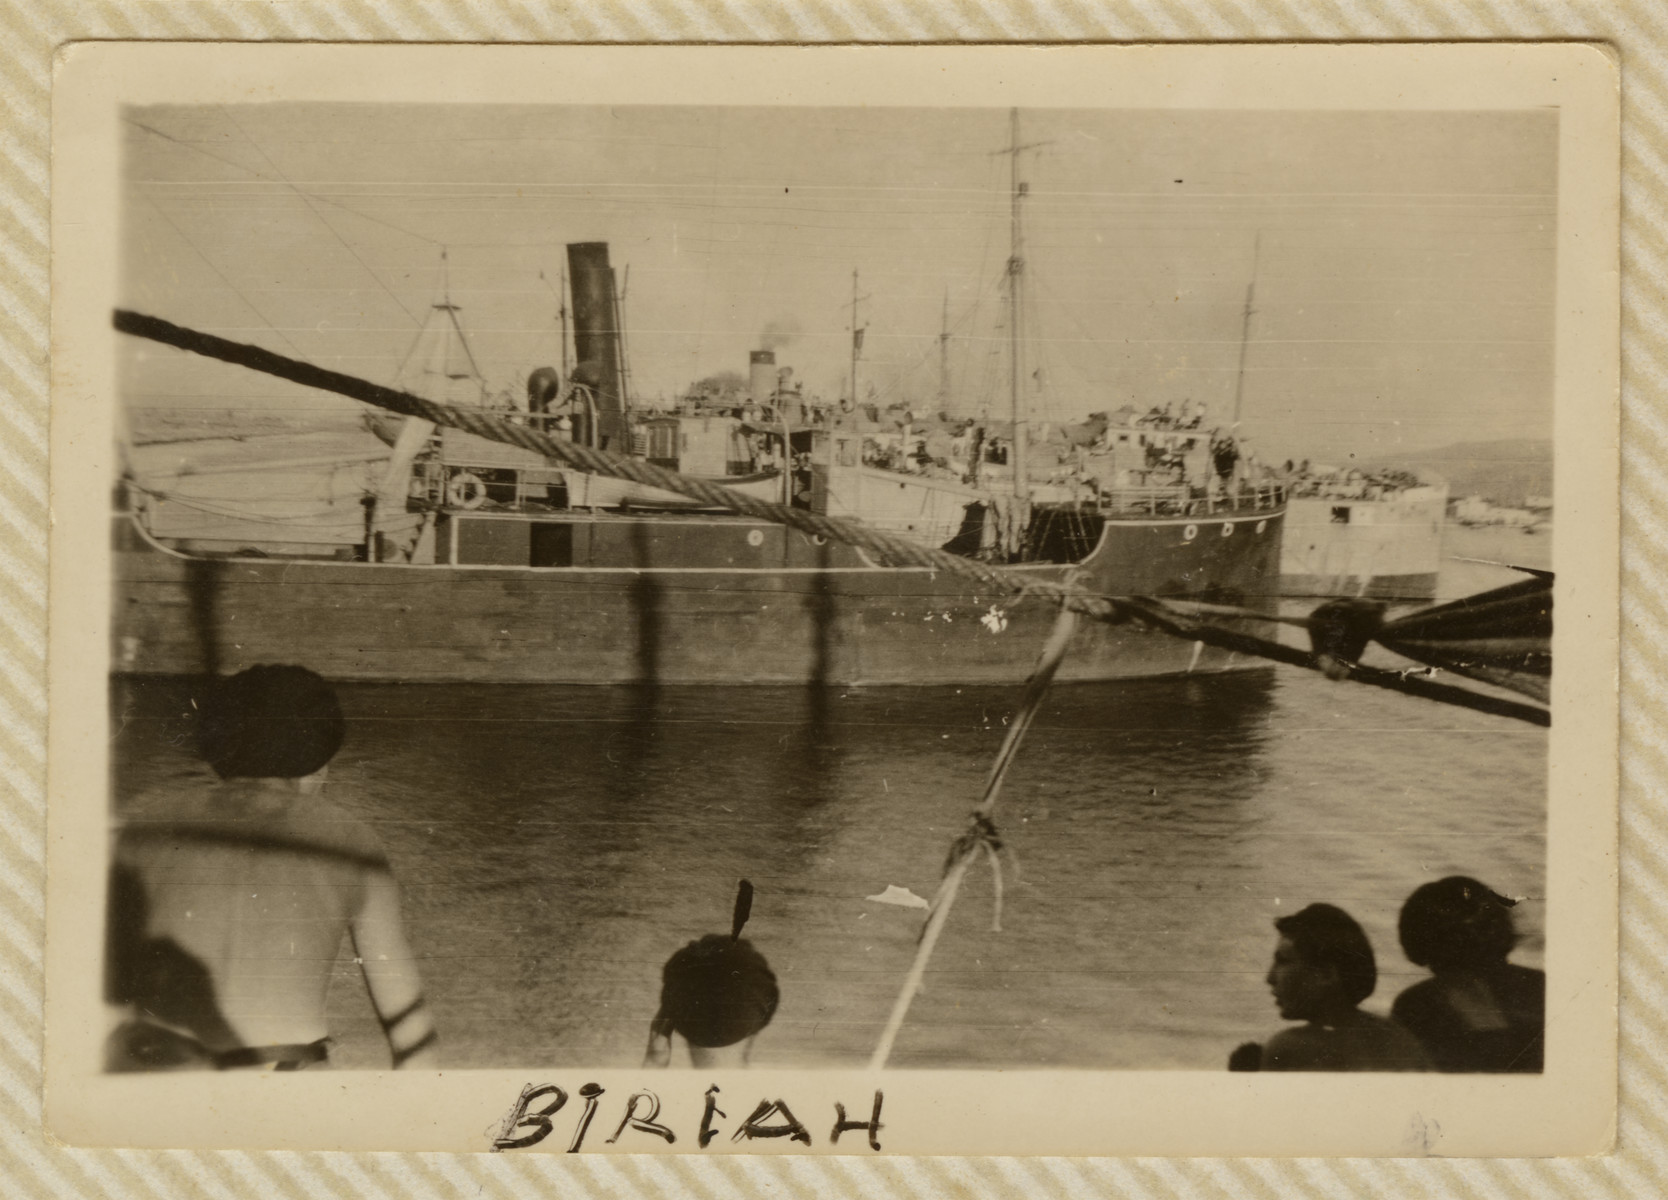 View of the Biriah, a ship carrying Jewish refugees en route to Palestine.